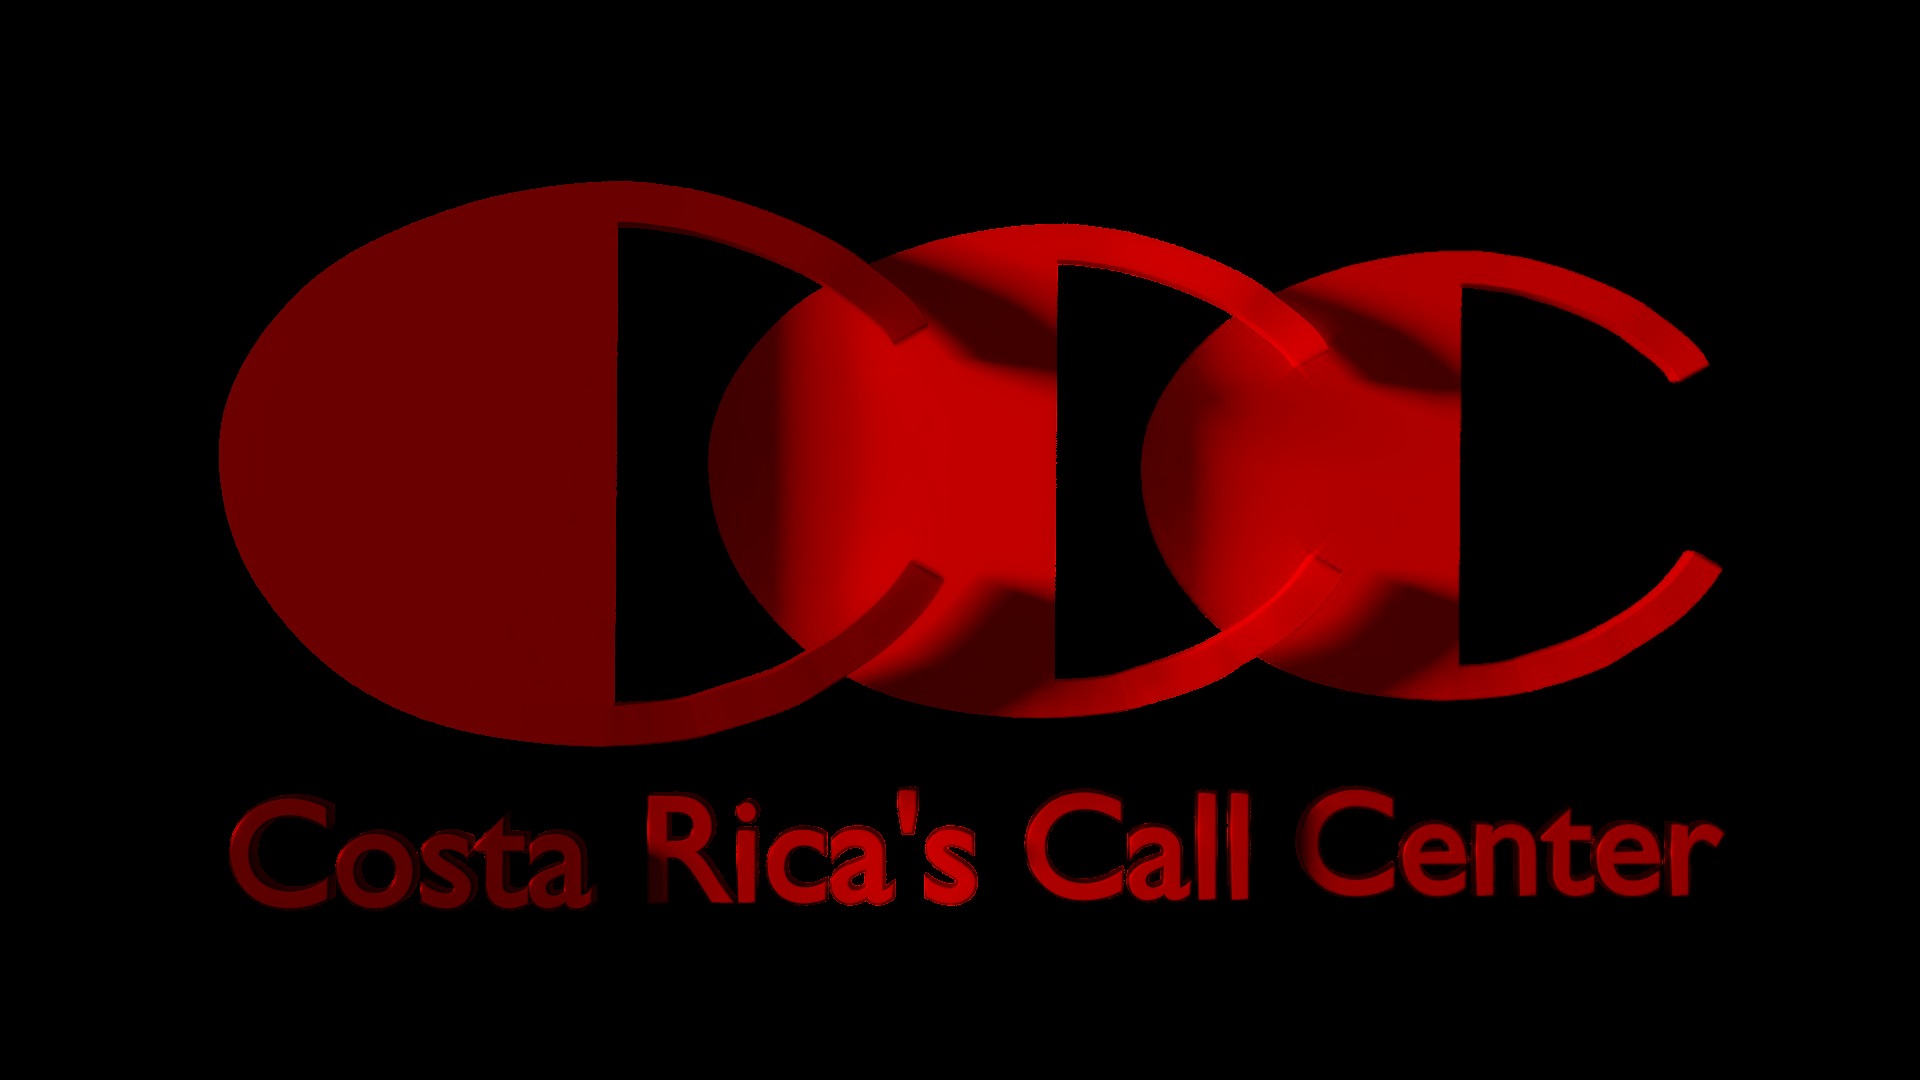 VIRTUAL ASSISTANT CHAT AGENT COSTA RICA.jpg  by richardblank